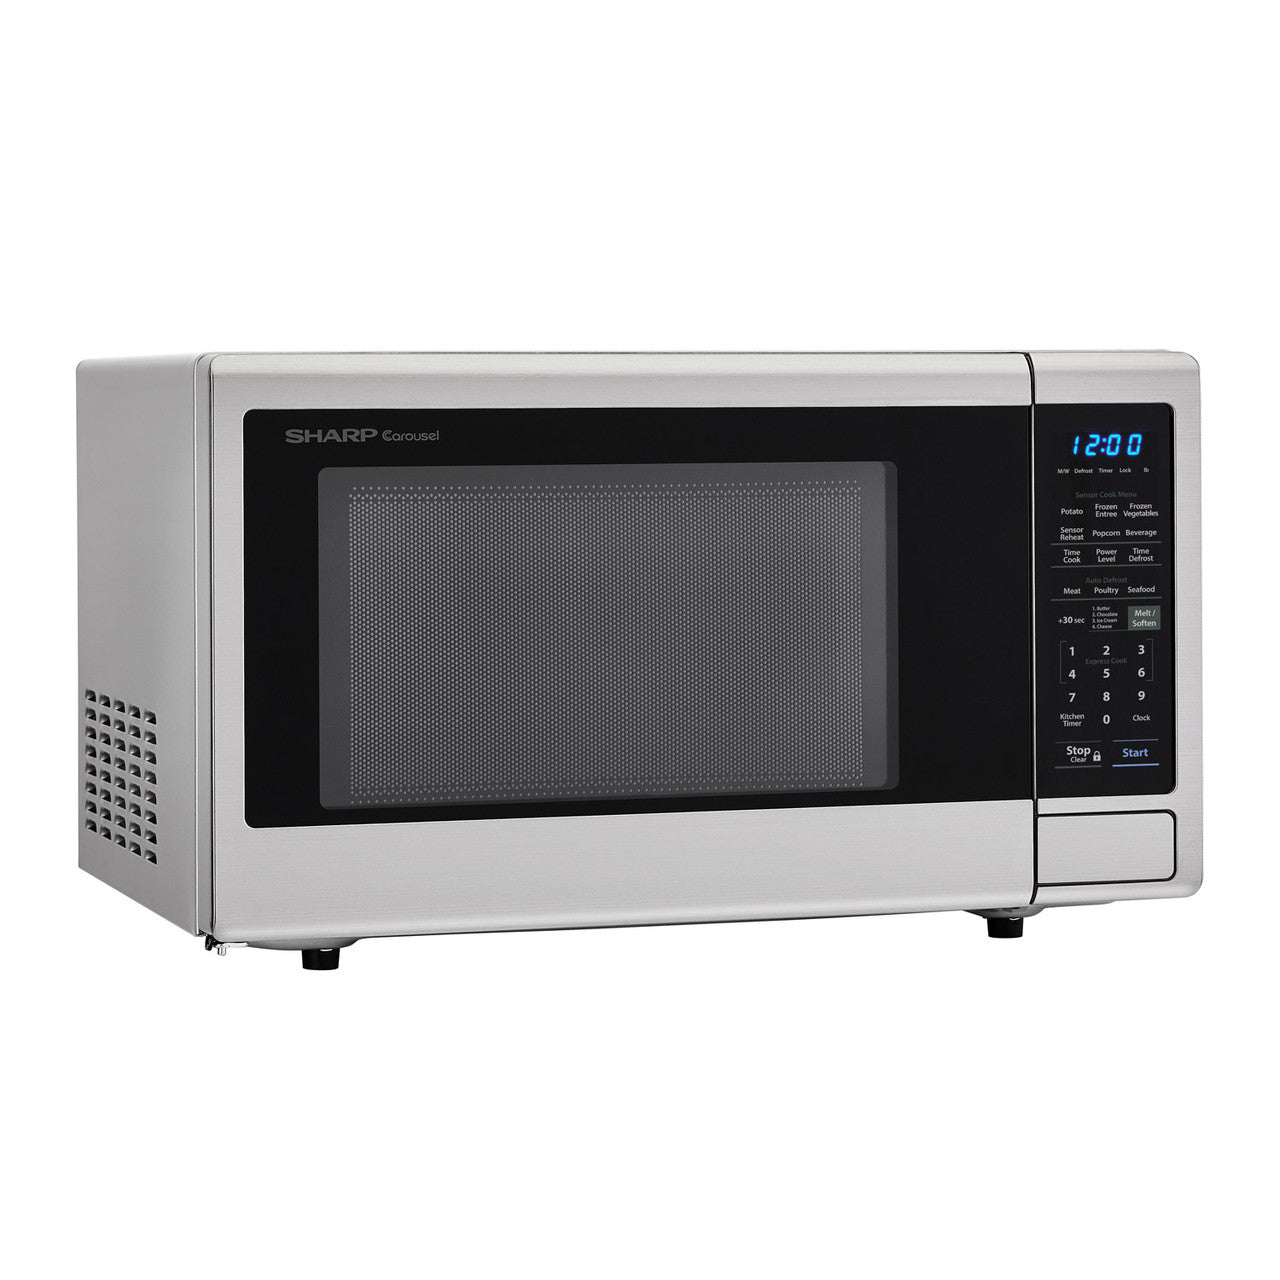 Sharp Carousel 21" 1.4 CU. Ft. 1000W Stainless Steel Countertop Microwave Oven